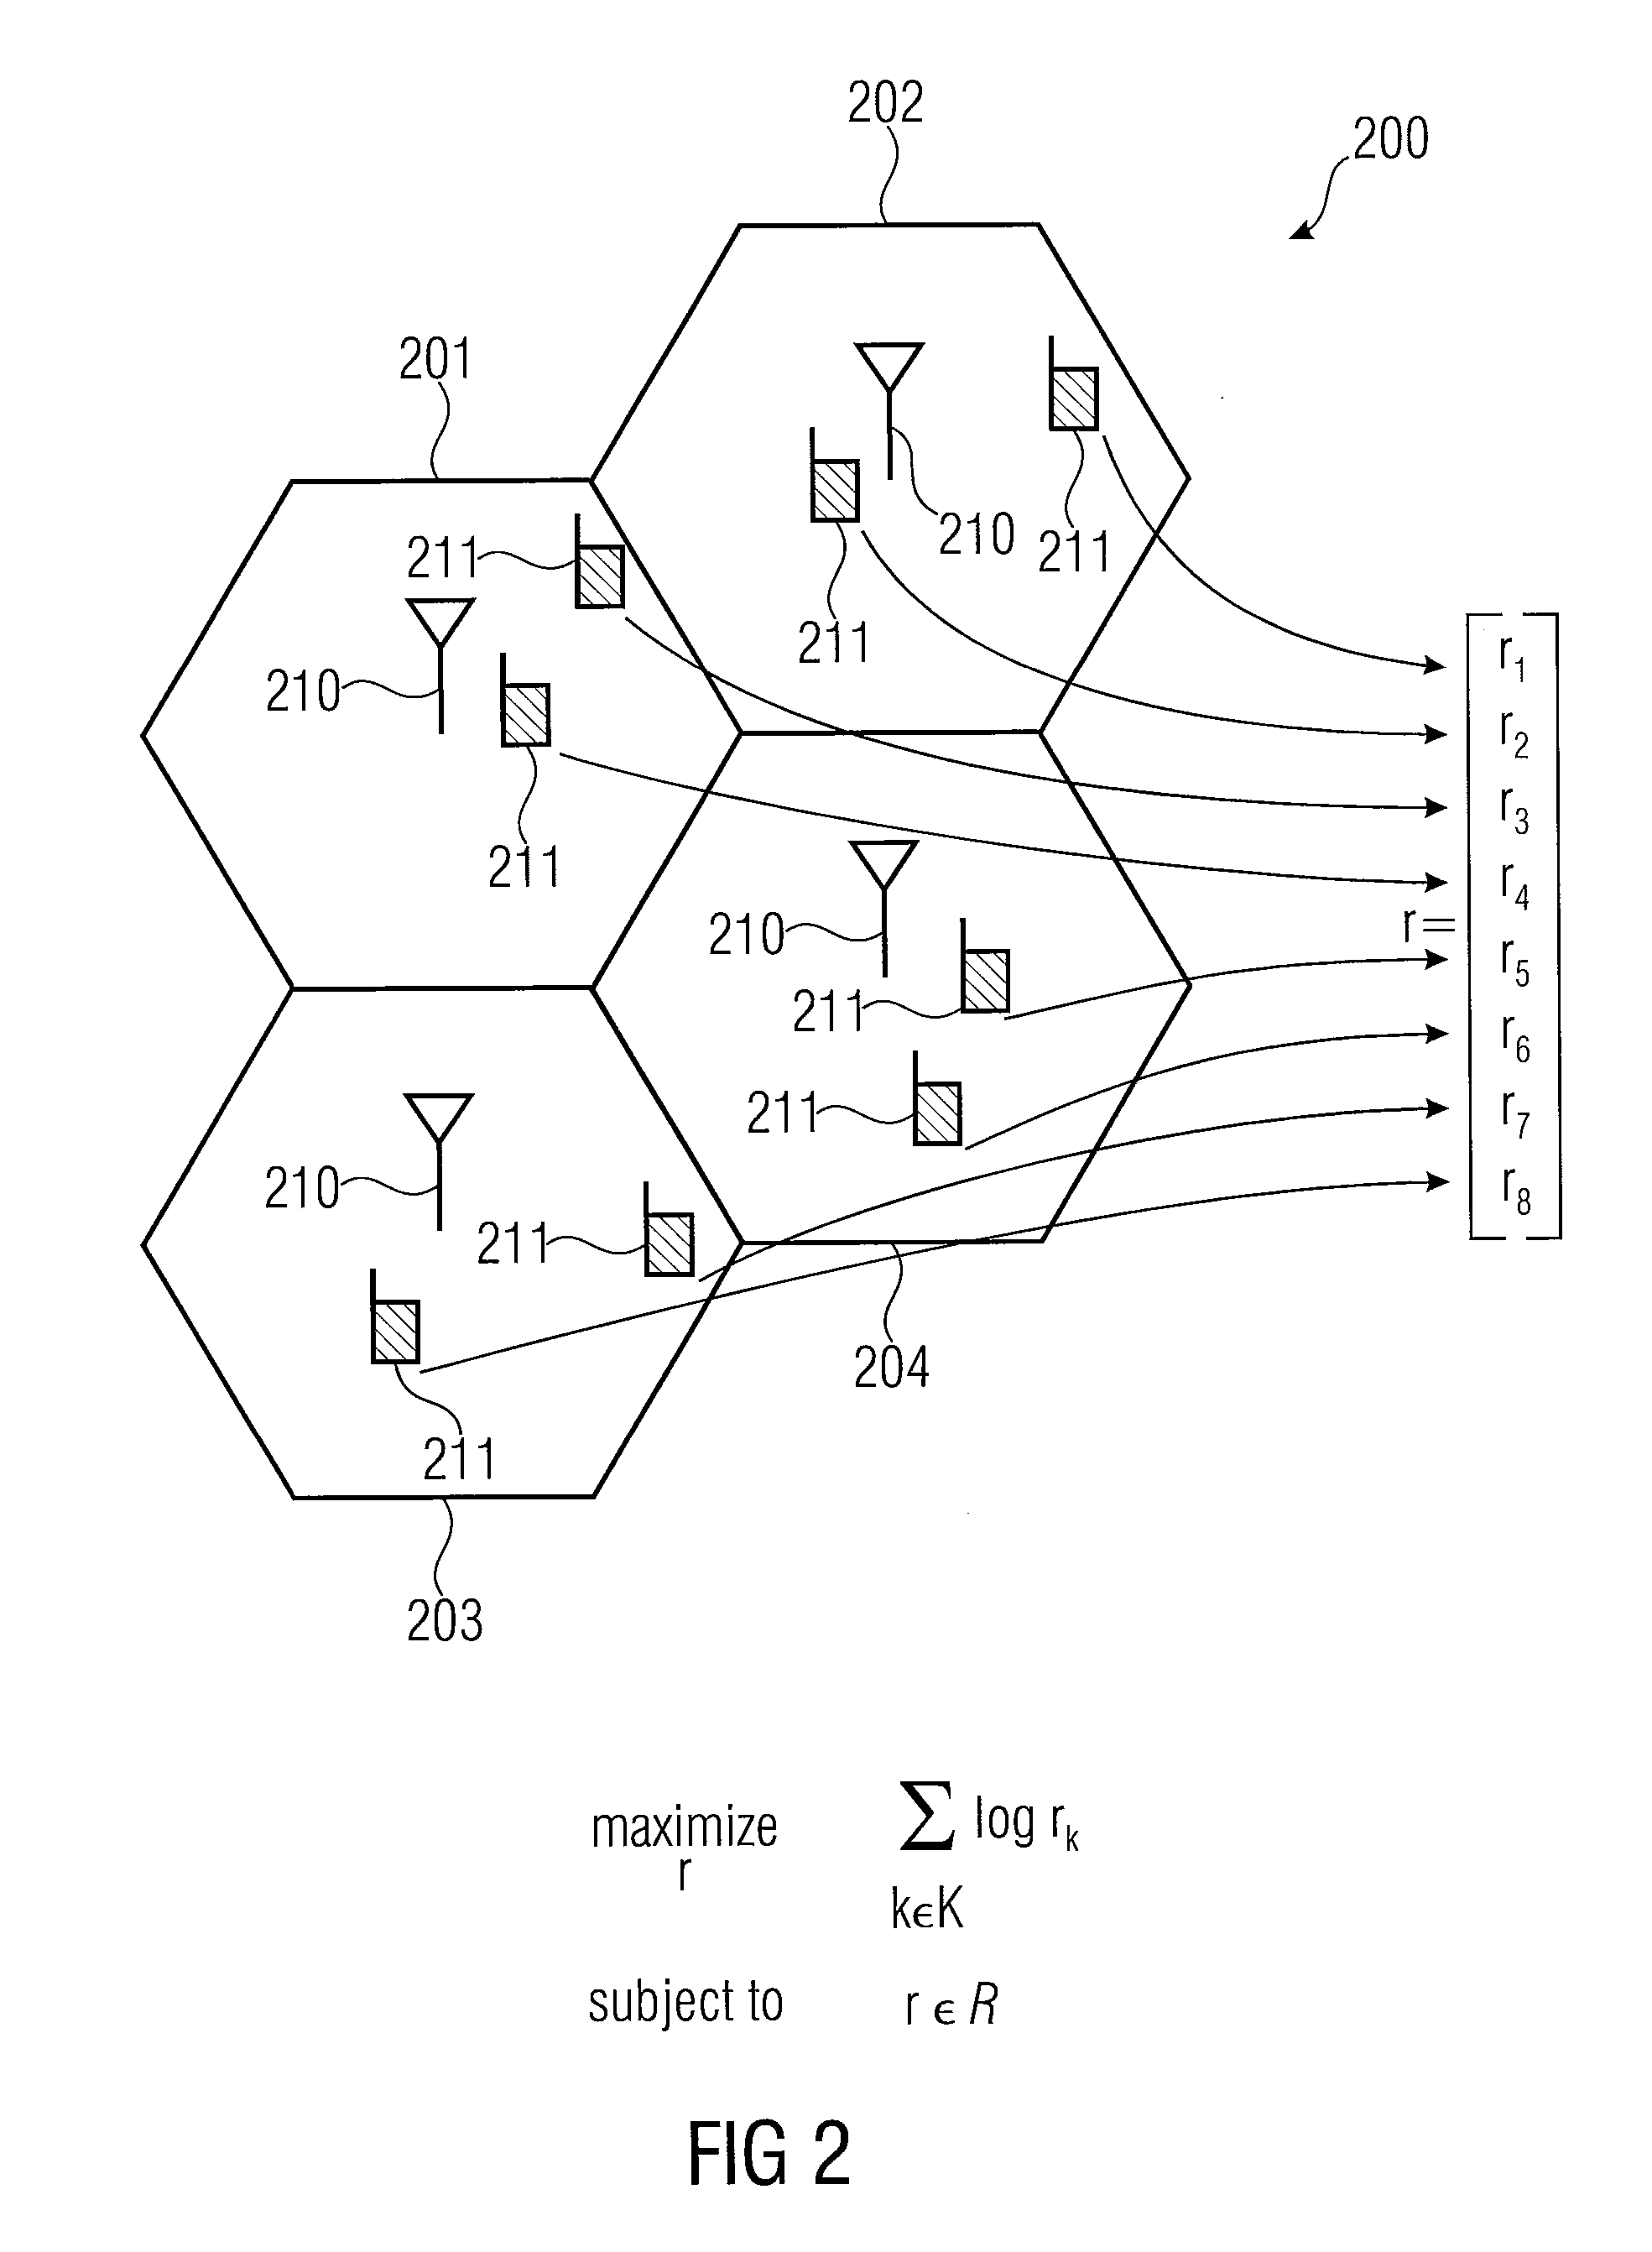 Apparatus and method for scheduling transmission resources to users served by a base station using a prediction of rate regions